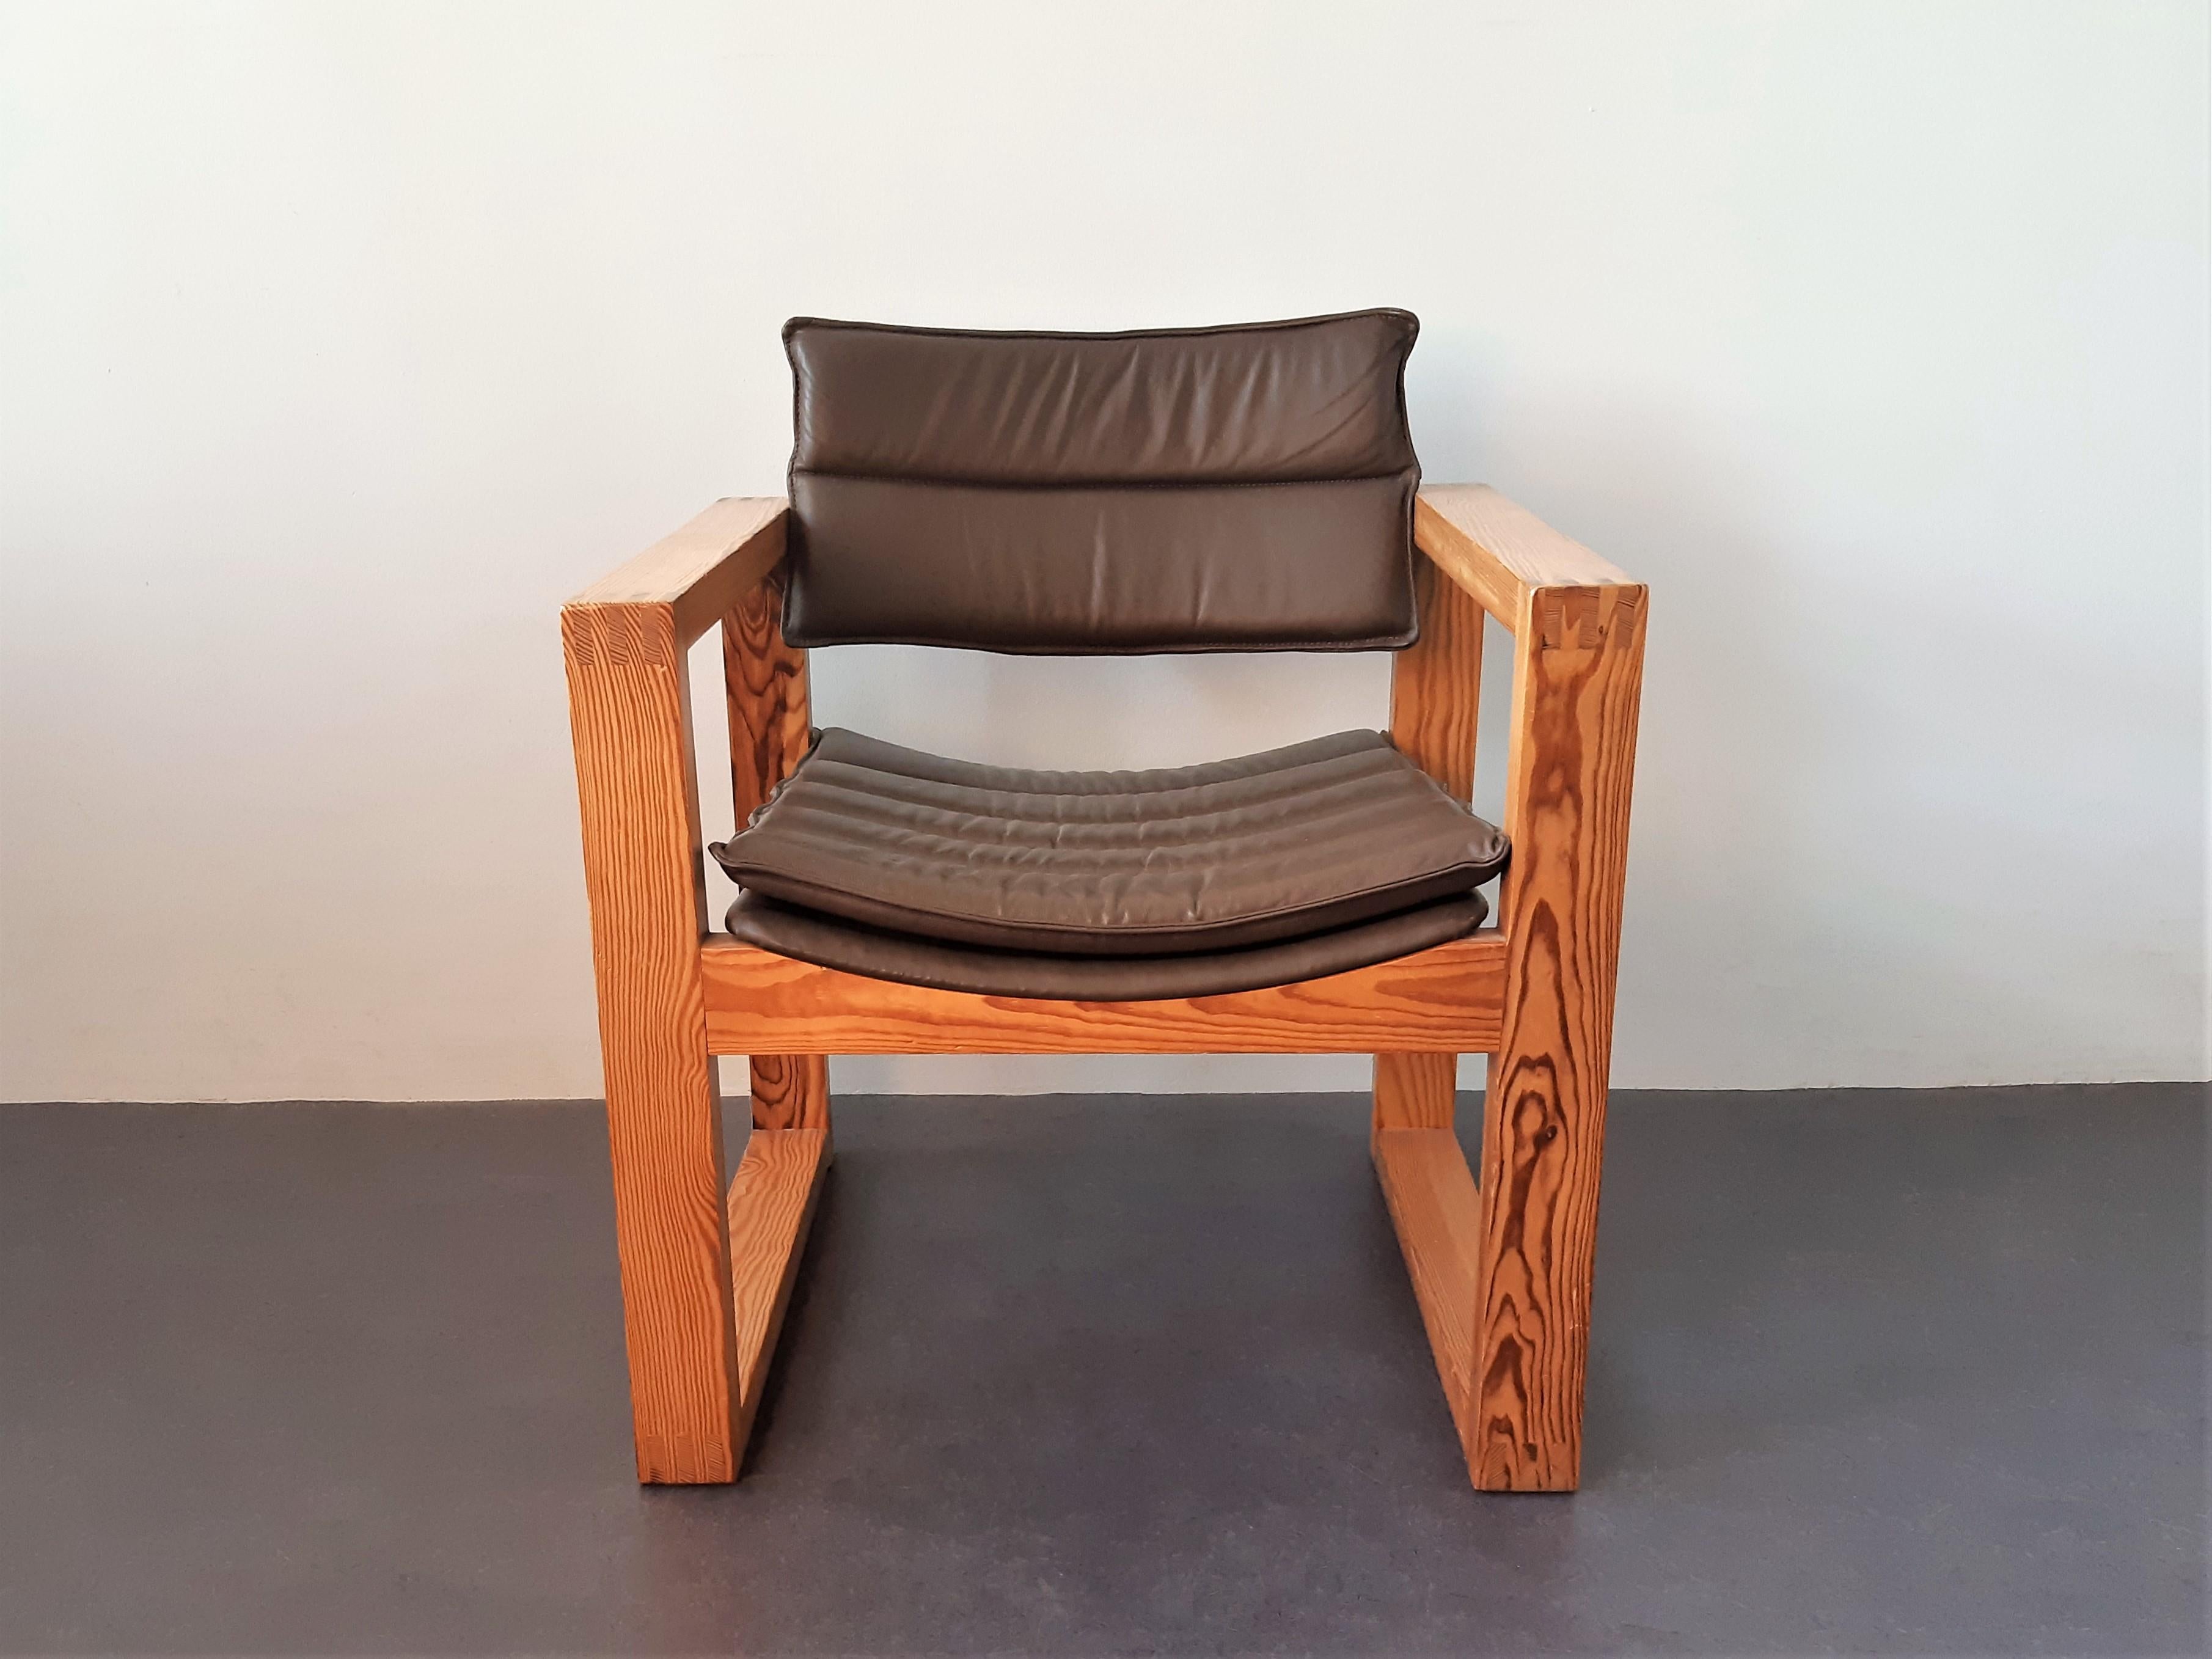 This chair is of a very nice, minimalistic and cubic design by Ate van Apeldoorn for Houtwerk Hattem. The use of materials and techniques is significent for his designs. The frame is made of solid pine wood and the seat and backrest are made of